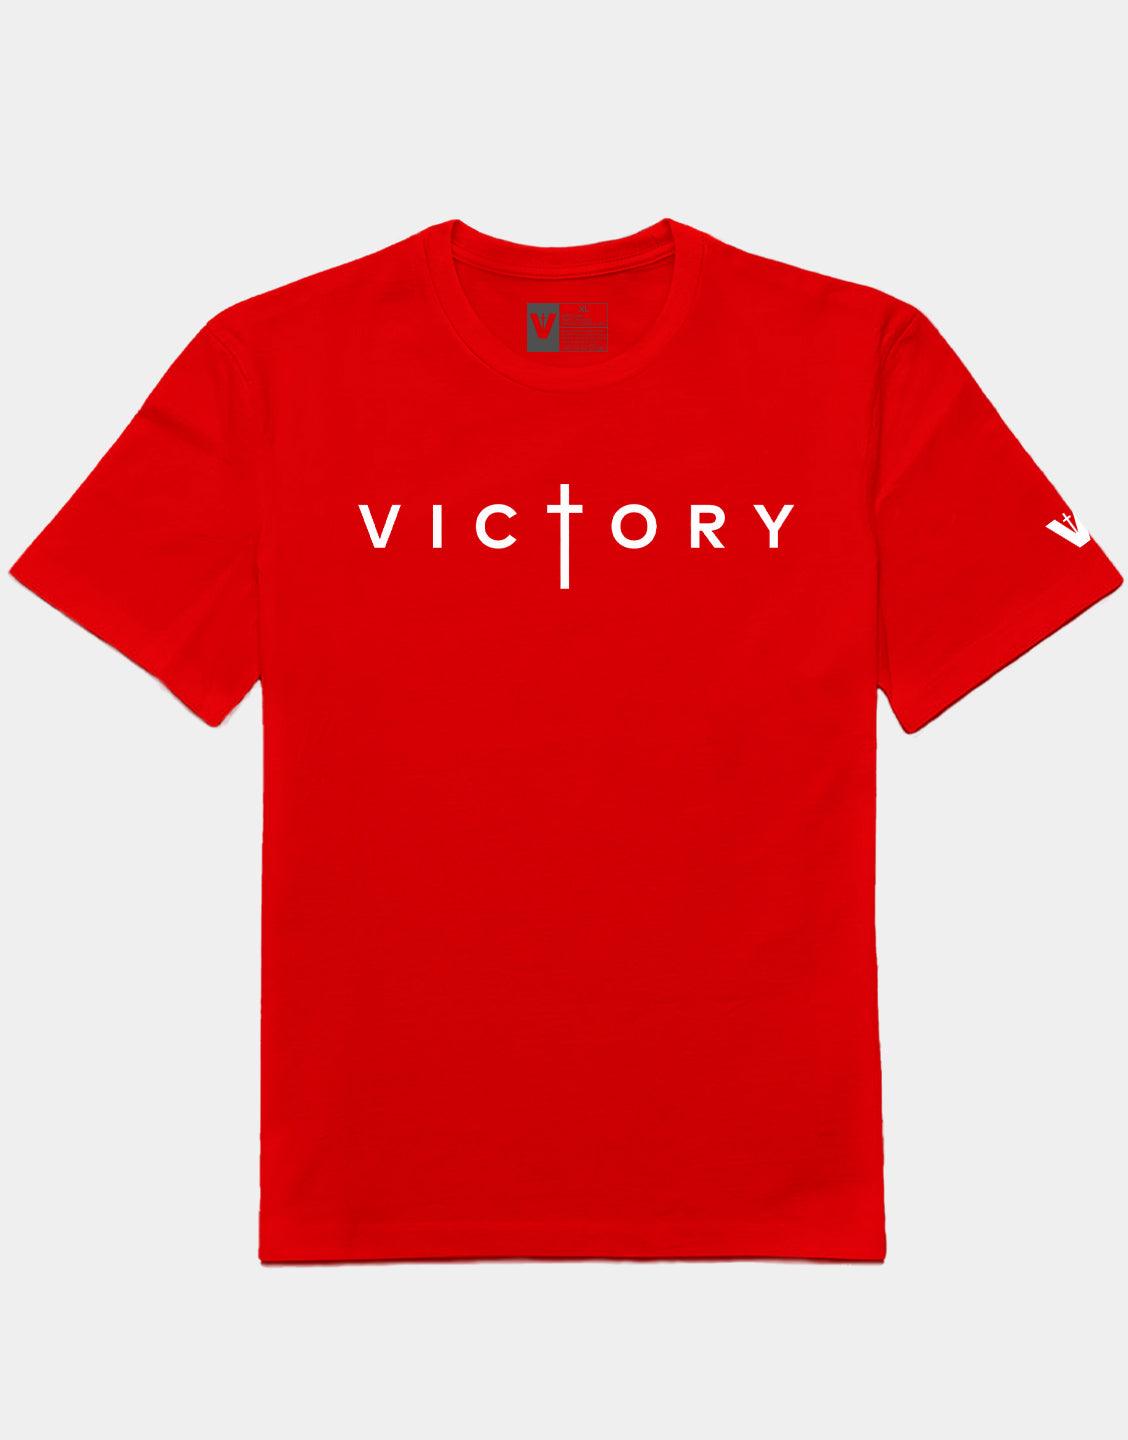 Victory Red T Shirt - VOTC Clothing